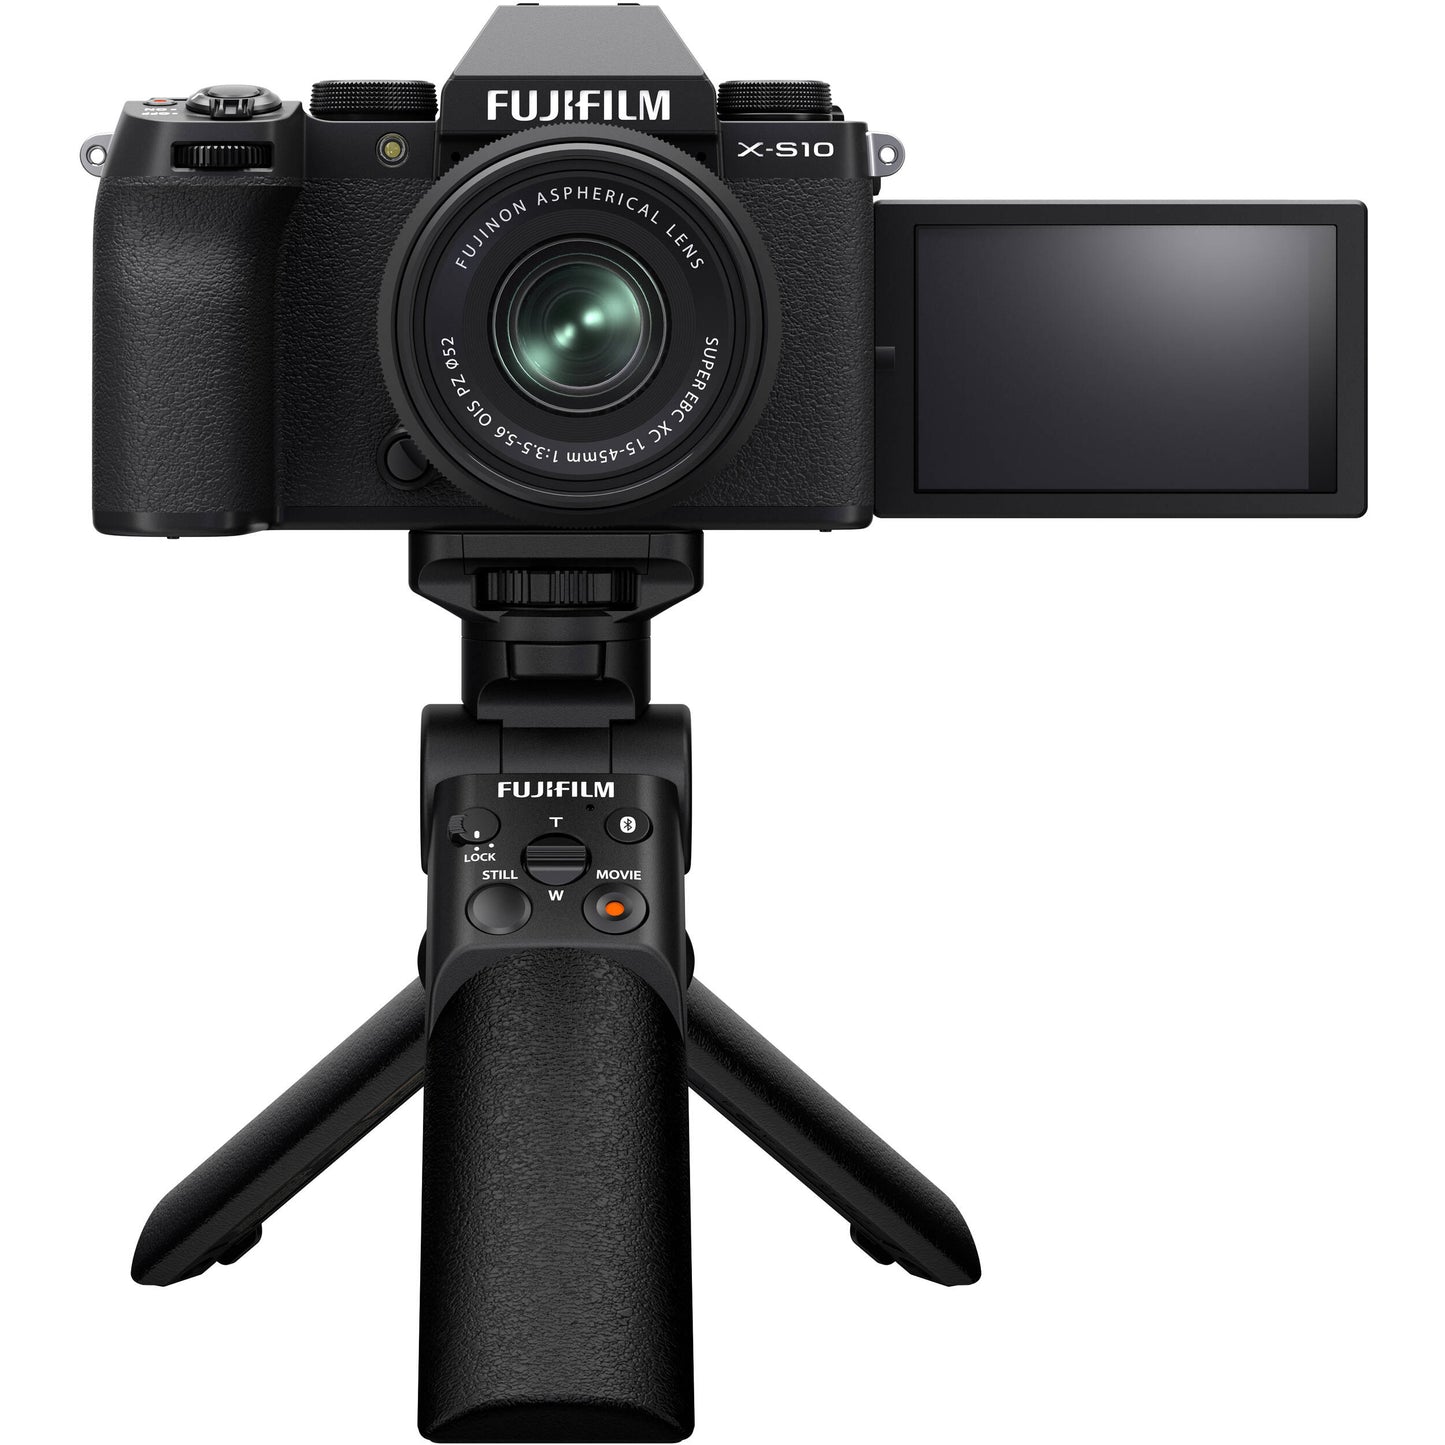 FUJIFILM X-S20 with XC 15-45mm Kit OIS PZ Lens with TG-BT1 Tripod Grip Bluetooth for Mirrorless Camera with 26.1MP APS-C X-Trans BSI CMOS 4 Sensor & X-Processor 5, 6K, 4K Full HD Up to 8fps Shooting, and Vari-Angle LCD Touchscreen